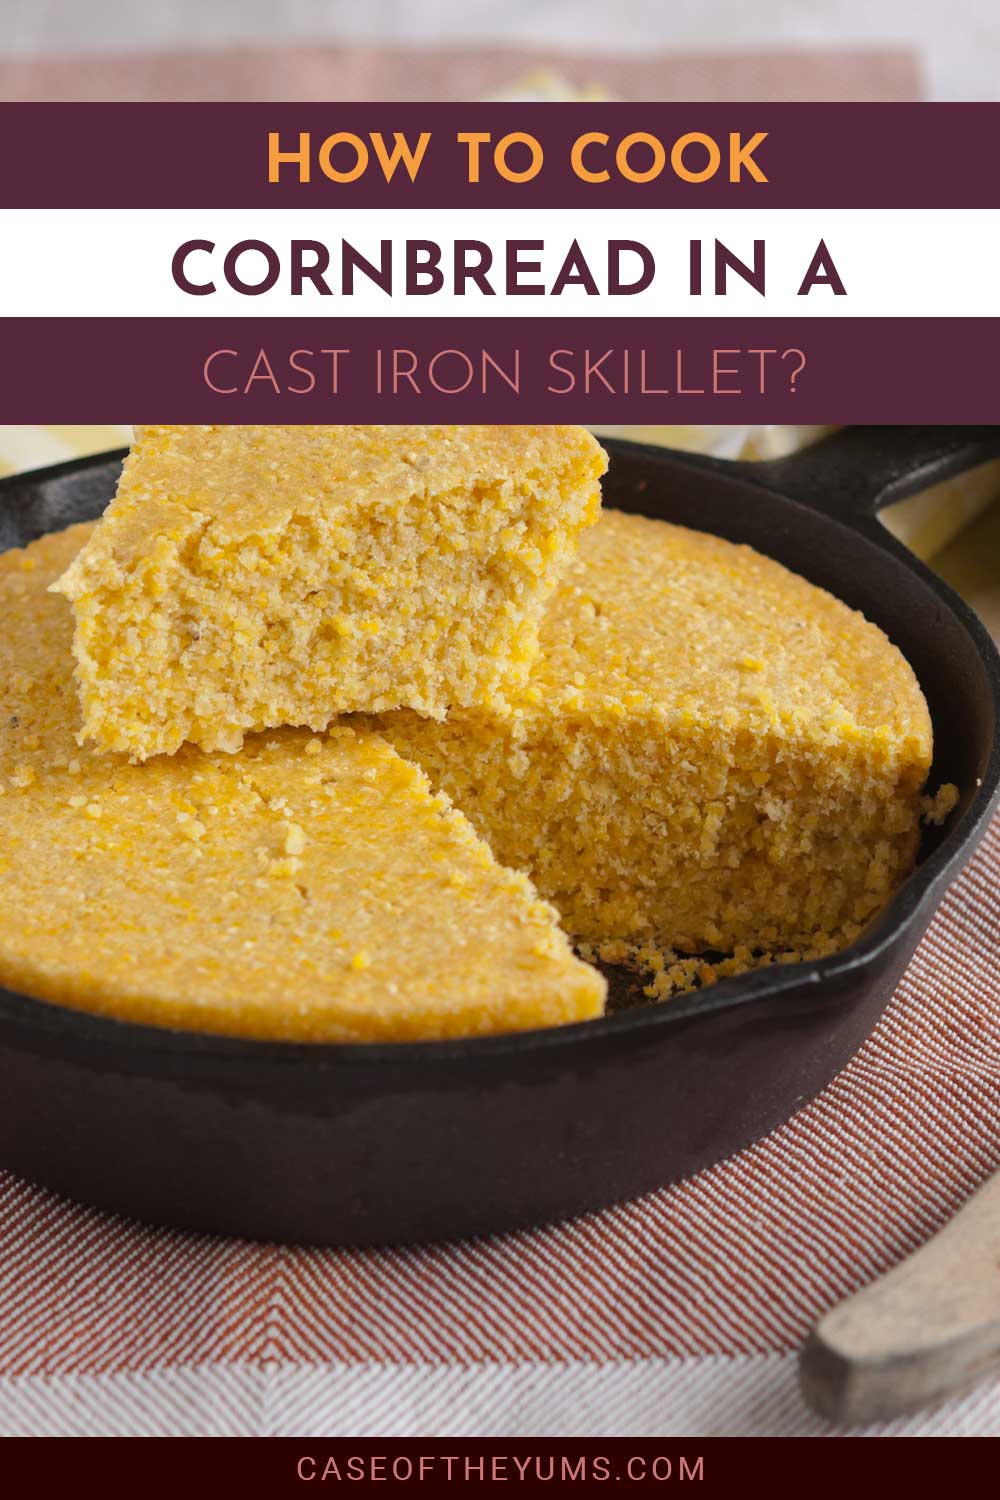 Cornbread - How To Cook it In A Cast Iron Skillet?